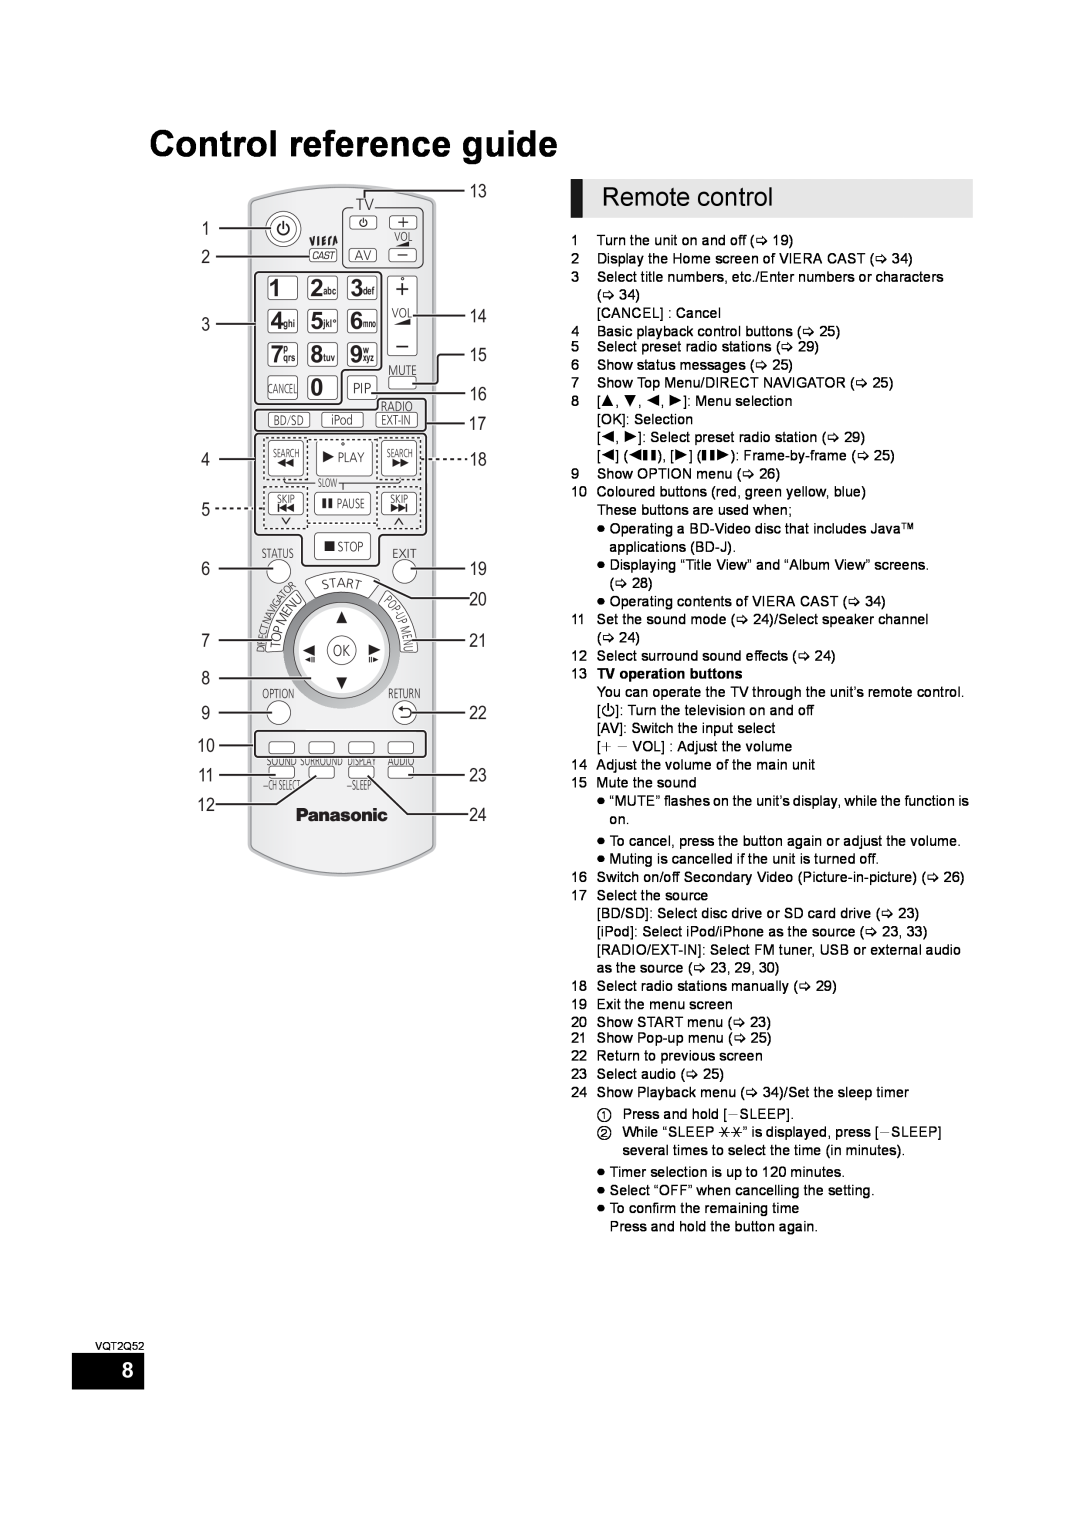 Philips SC-BT735 operating instructions Control reference guide, Remote control, 1 2, 9 10 